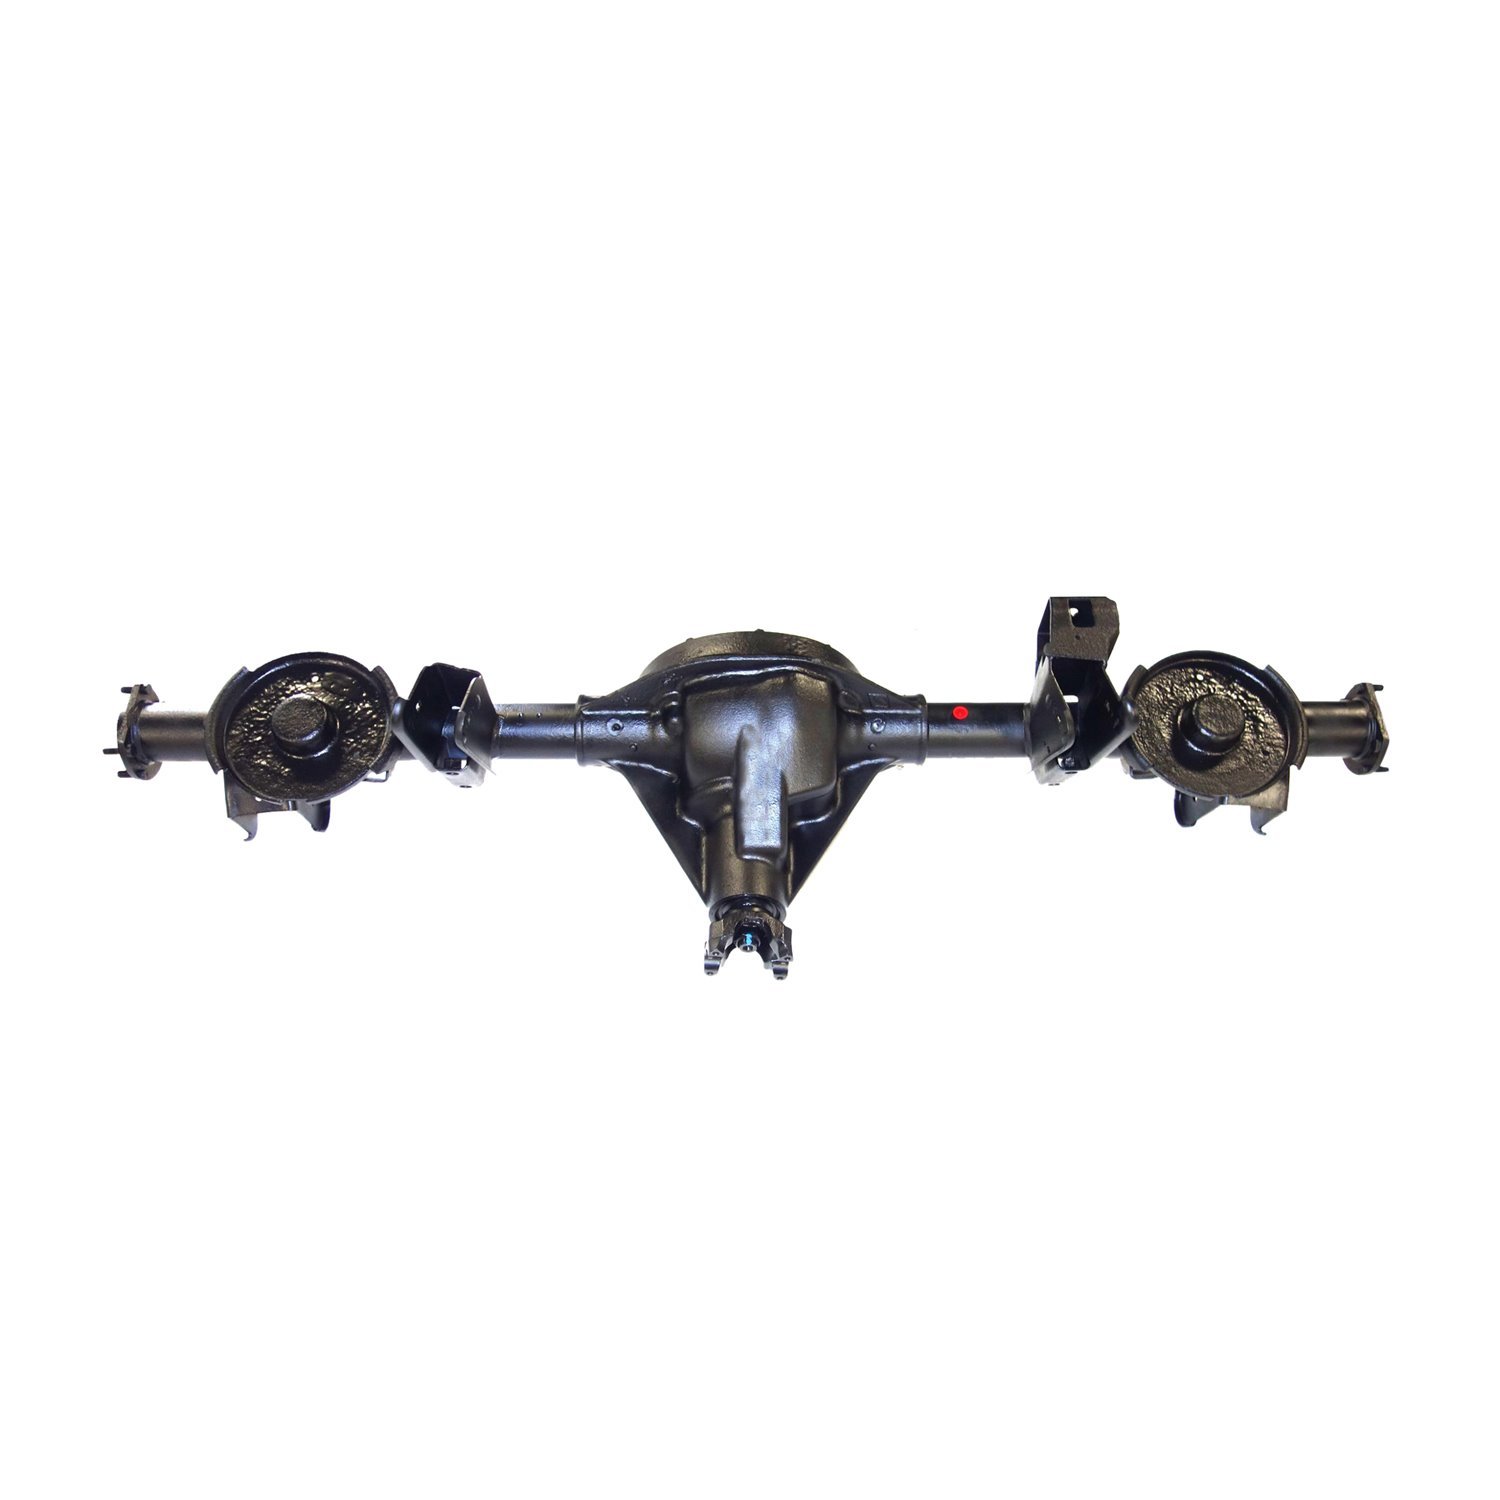 Remanufactured Complete Axle Assembly for Dana 35 2007 Jeep Wrangler Dana 35, 4.11 Ratio